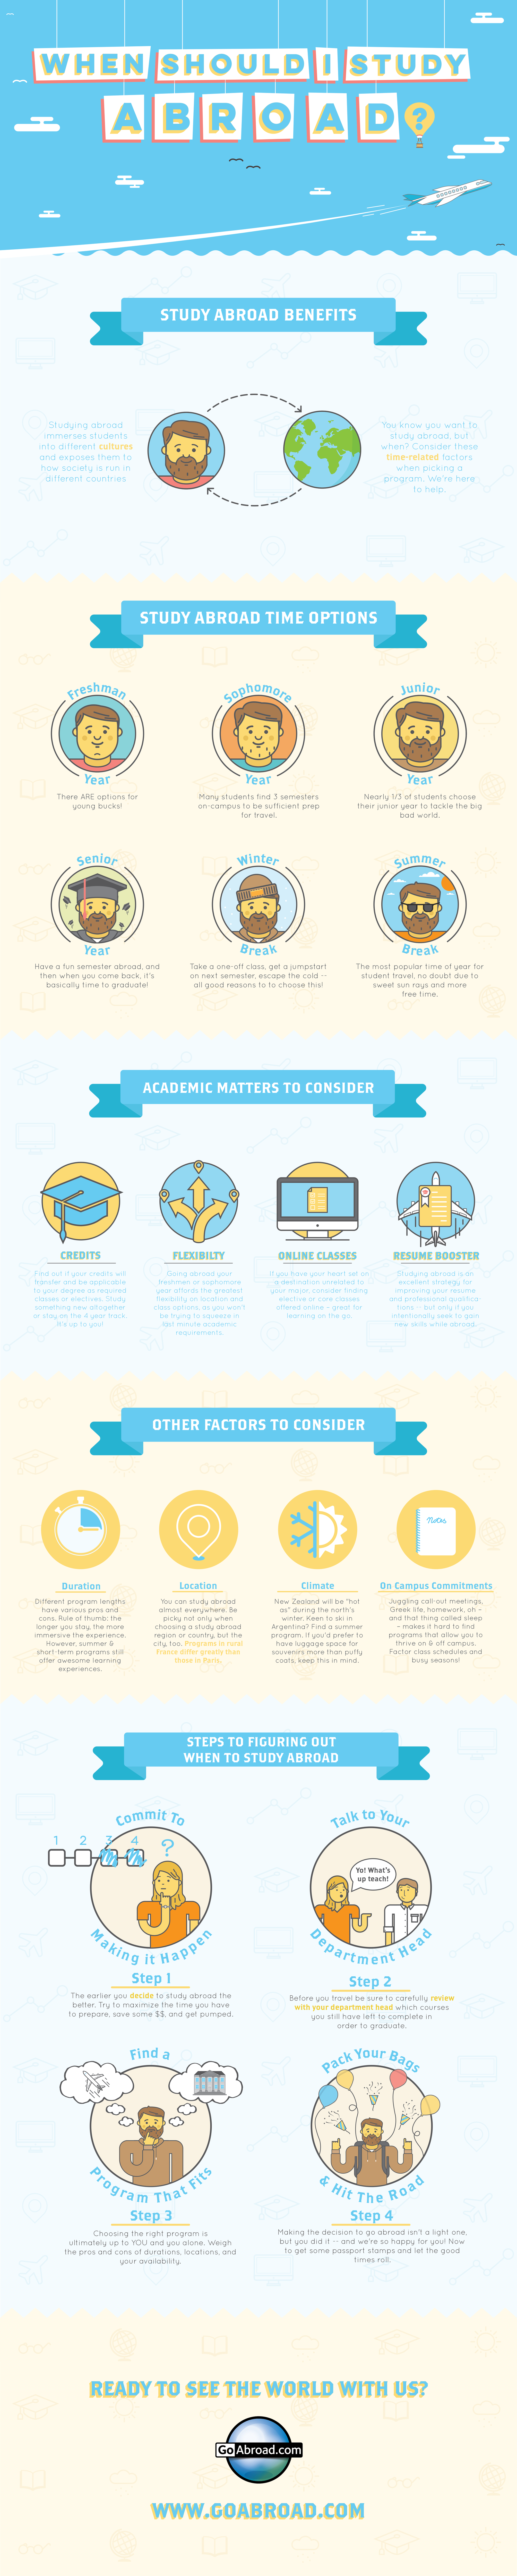 Plan to Study Abroad? Points to Consider - Infographic